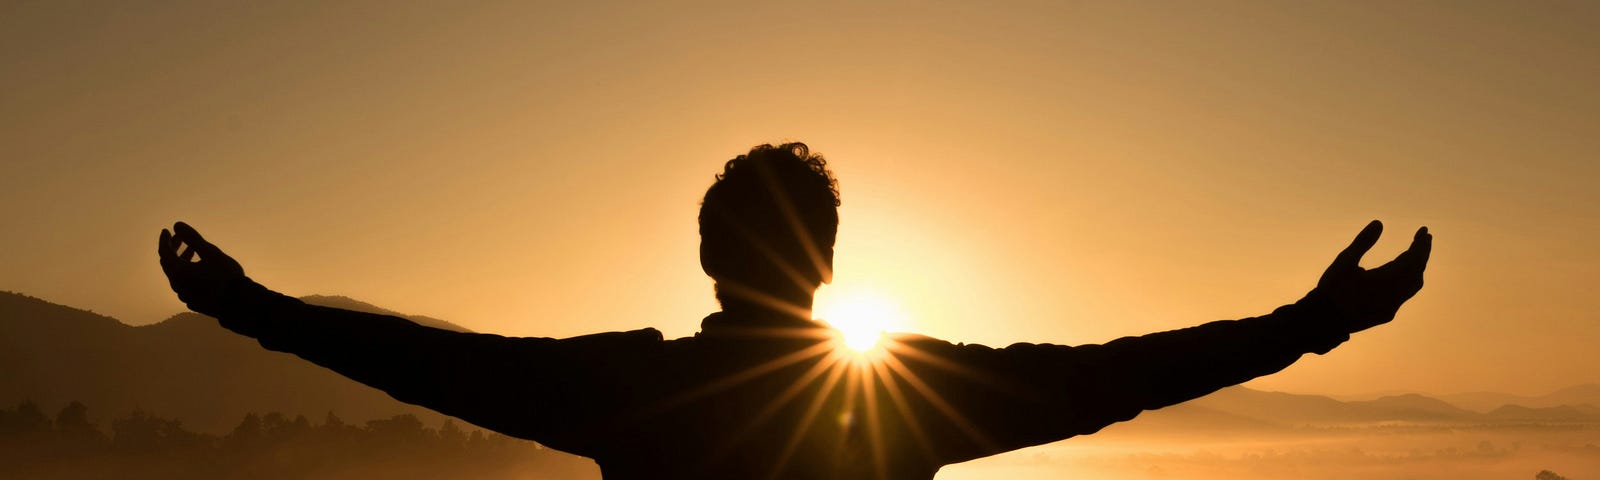 Silhouette of person facing the sunset with arms outstretched, possibly meditating on a mountaintop, or at least embracing the current moment.